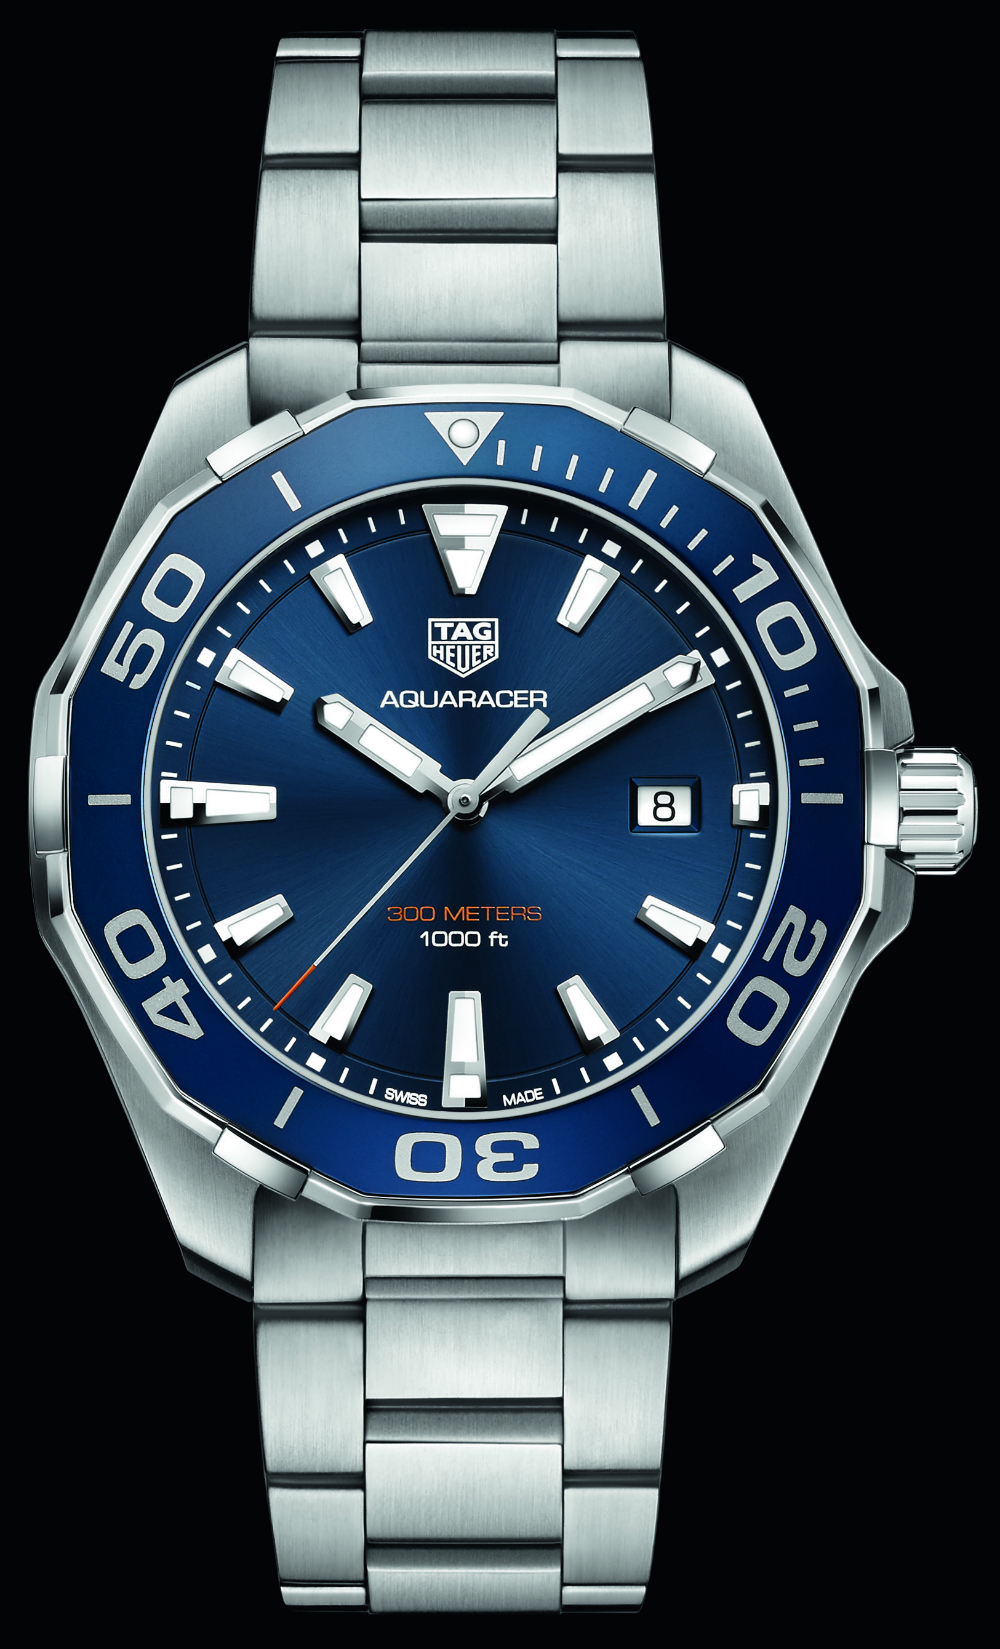 Tag Heuer Aquaracer Battery Replacement Cost | vlr.eng.br